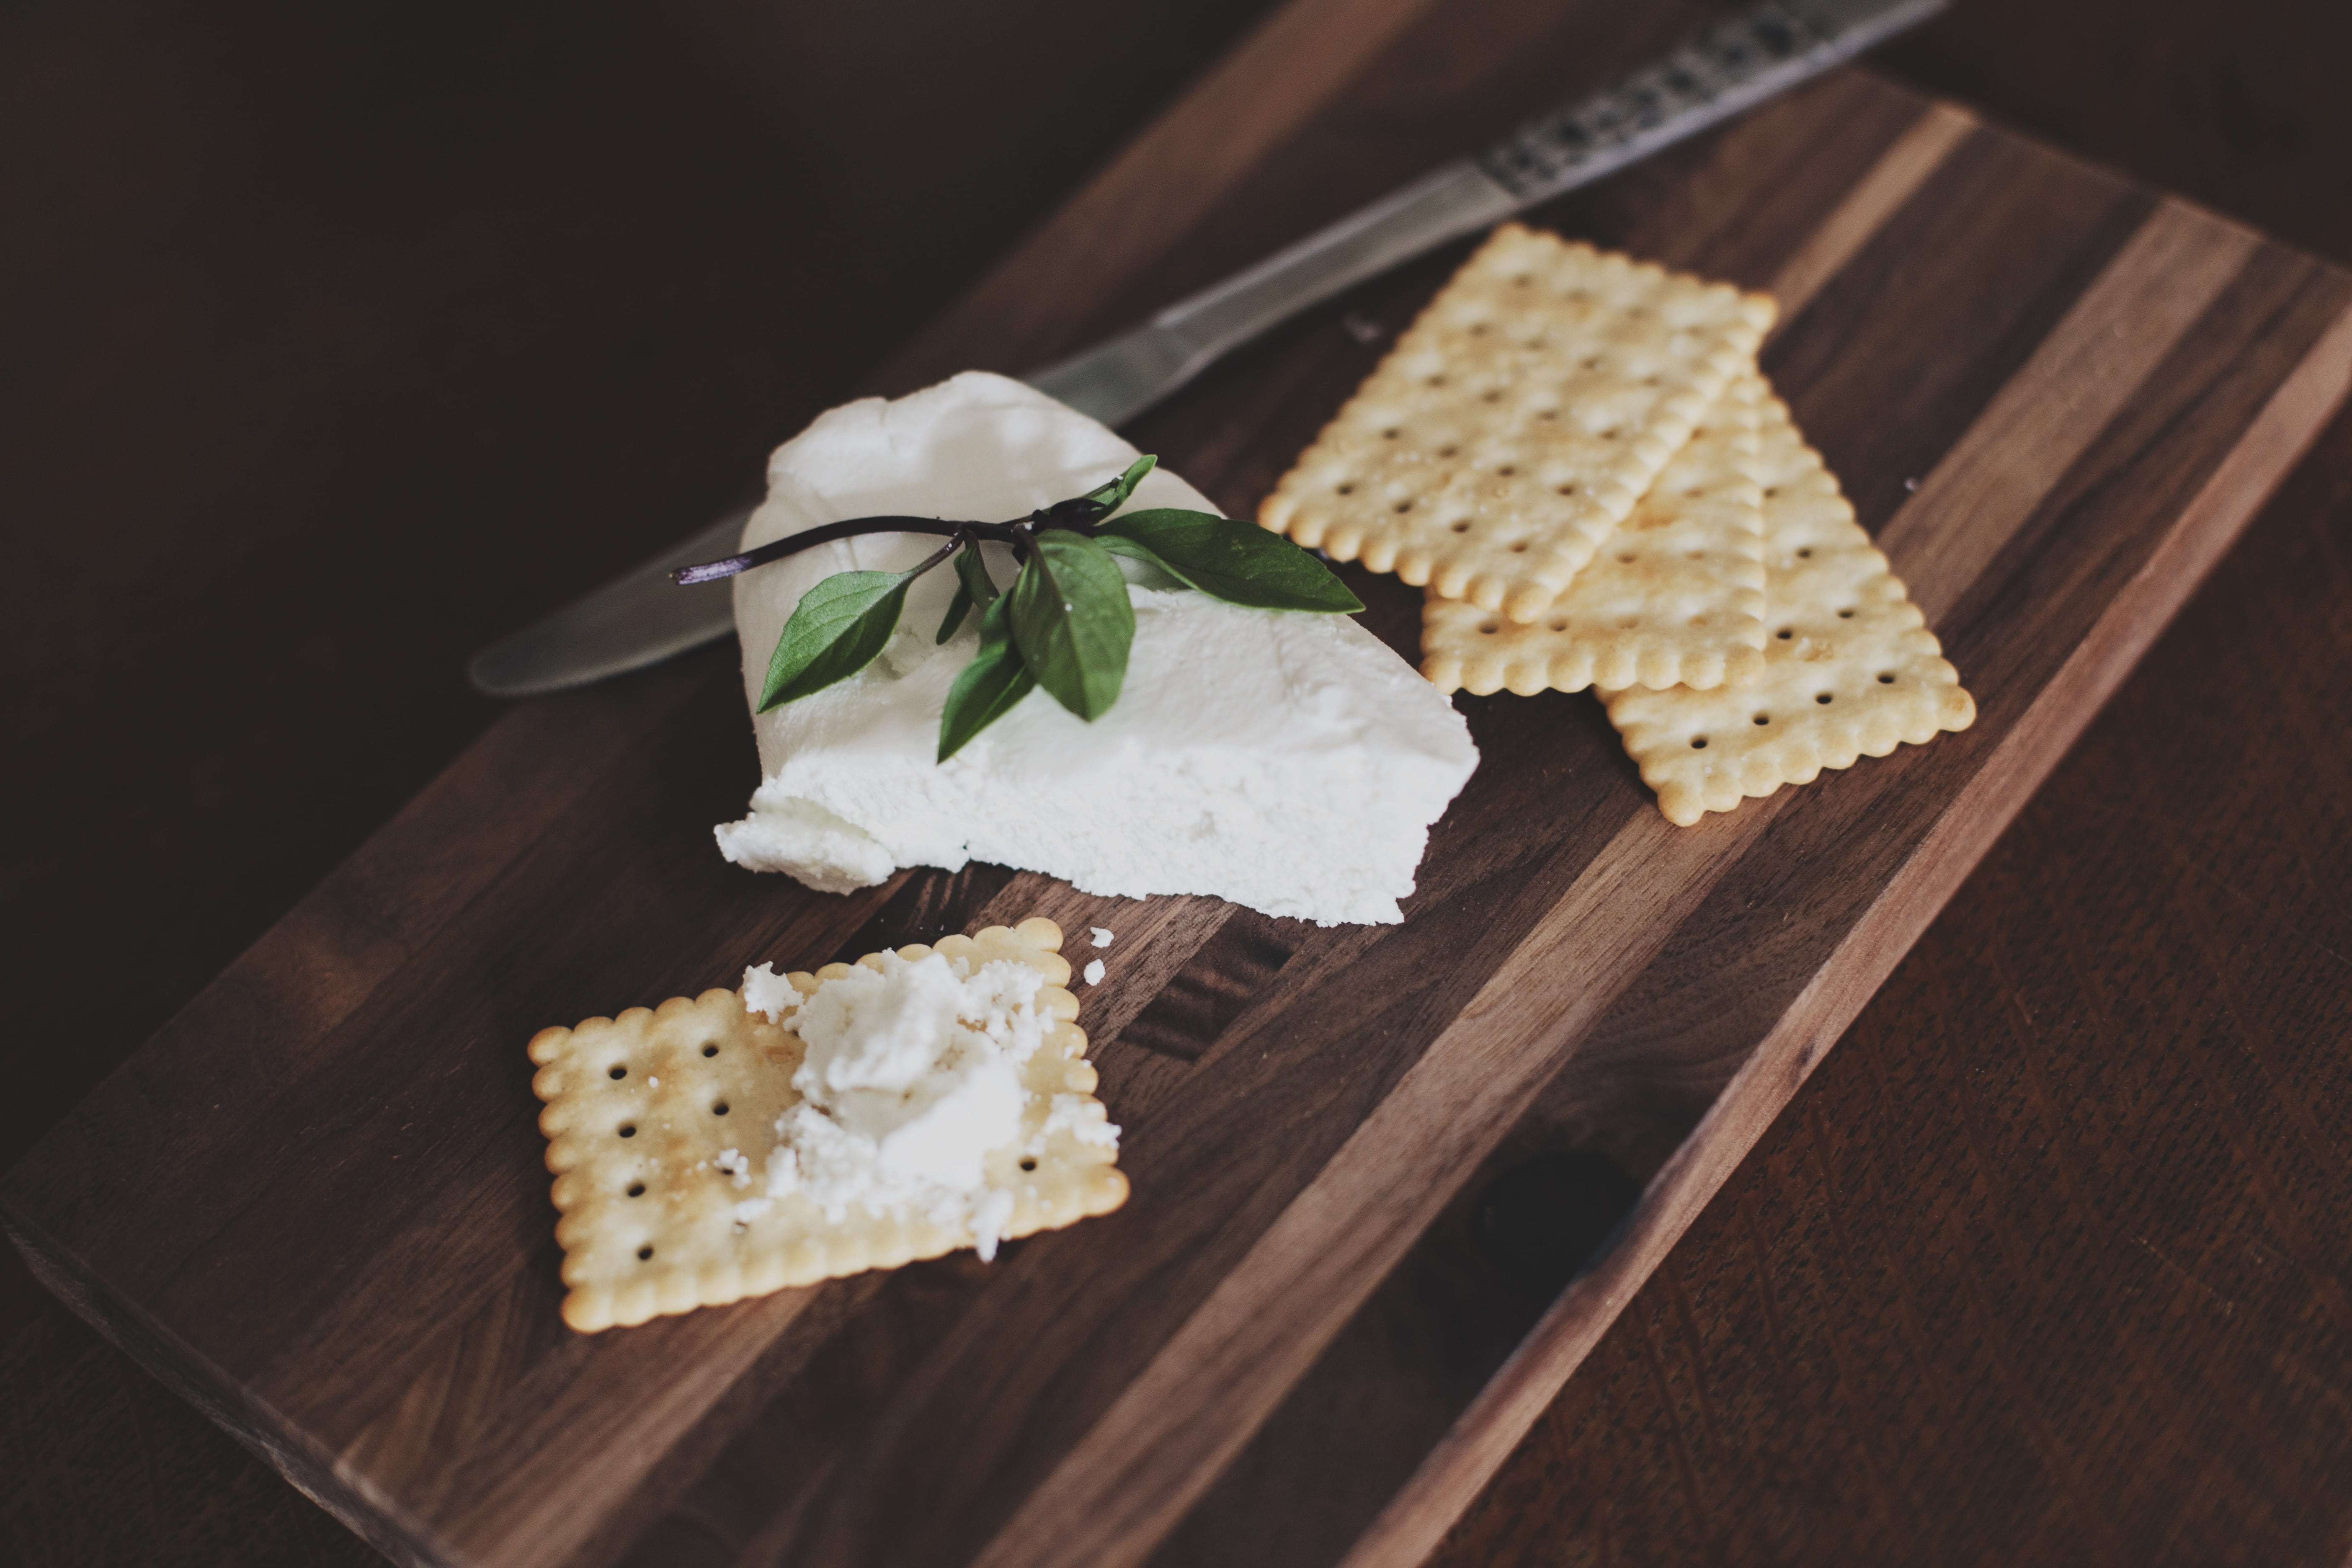 A cheese board with goat cheese and crackers.